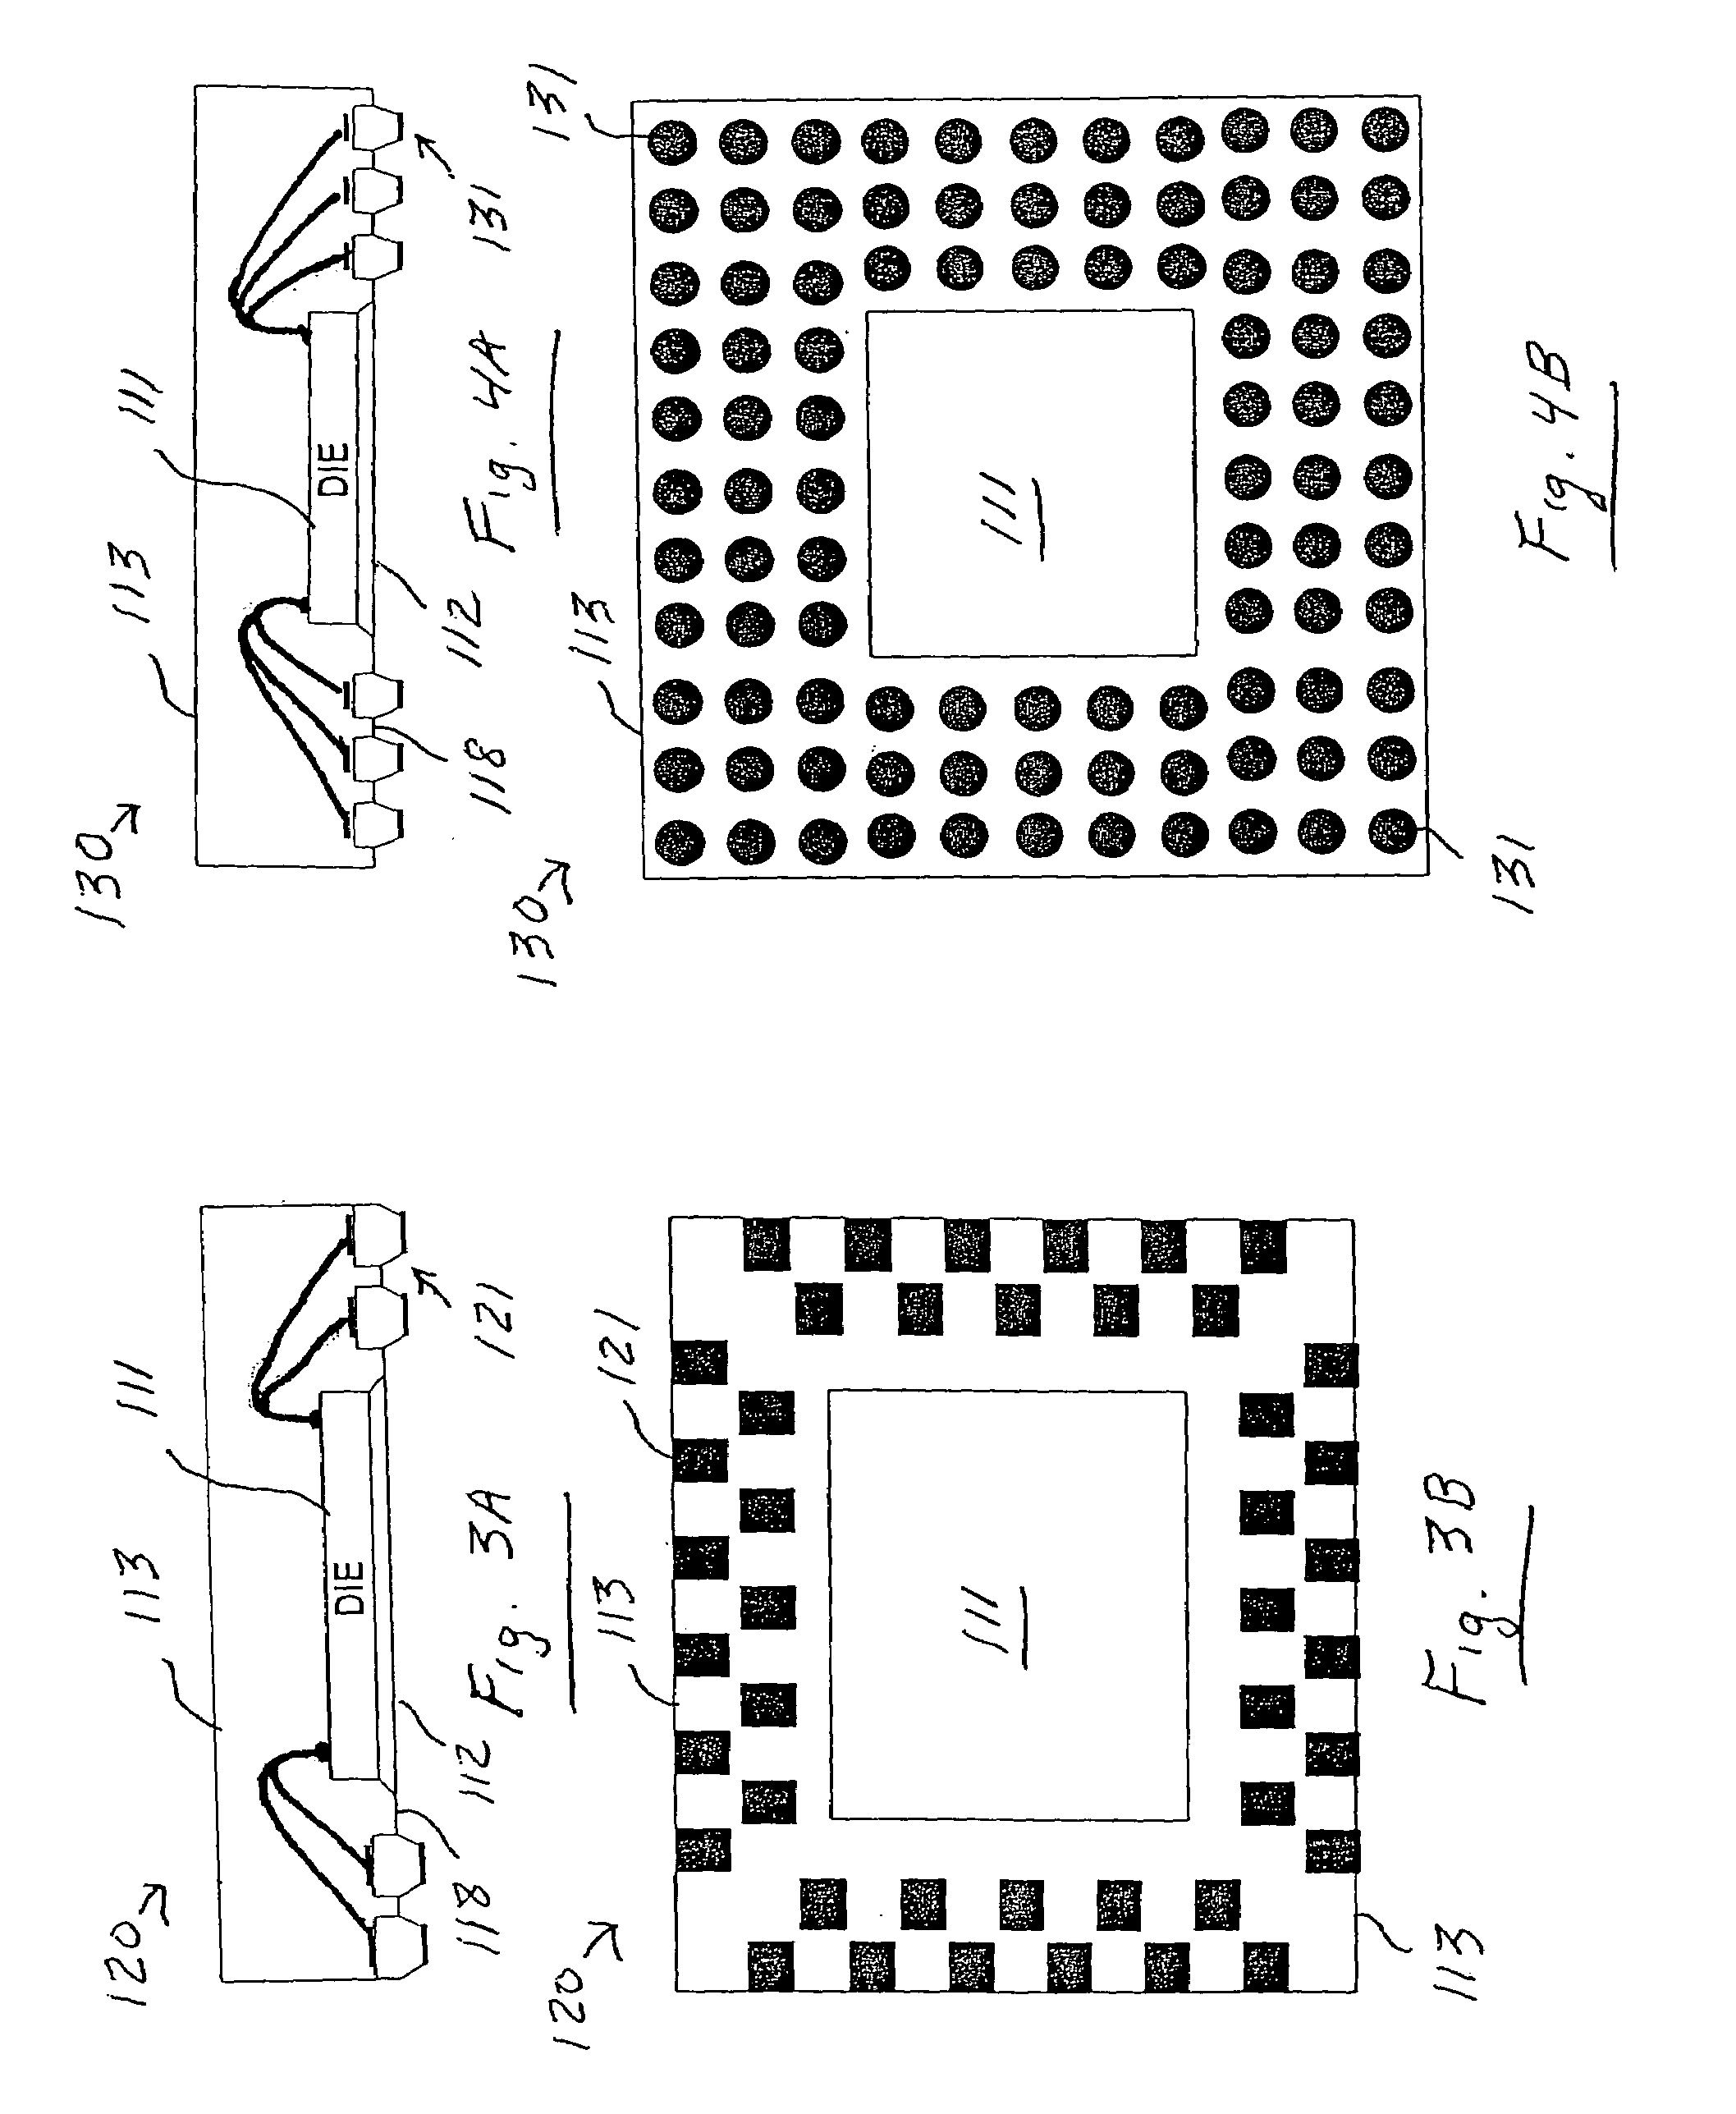 Flat no-lead semiconductor die package including stud terminals